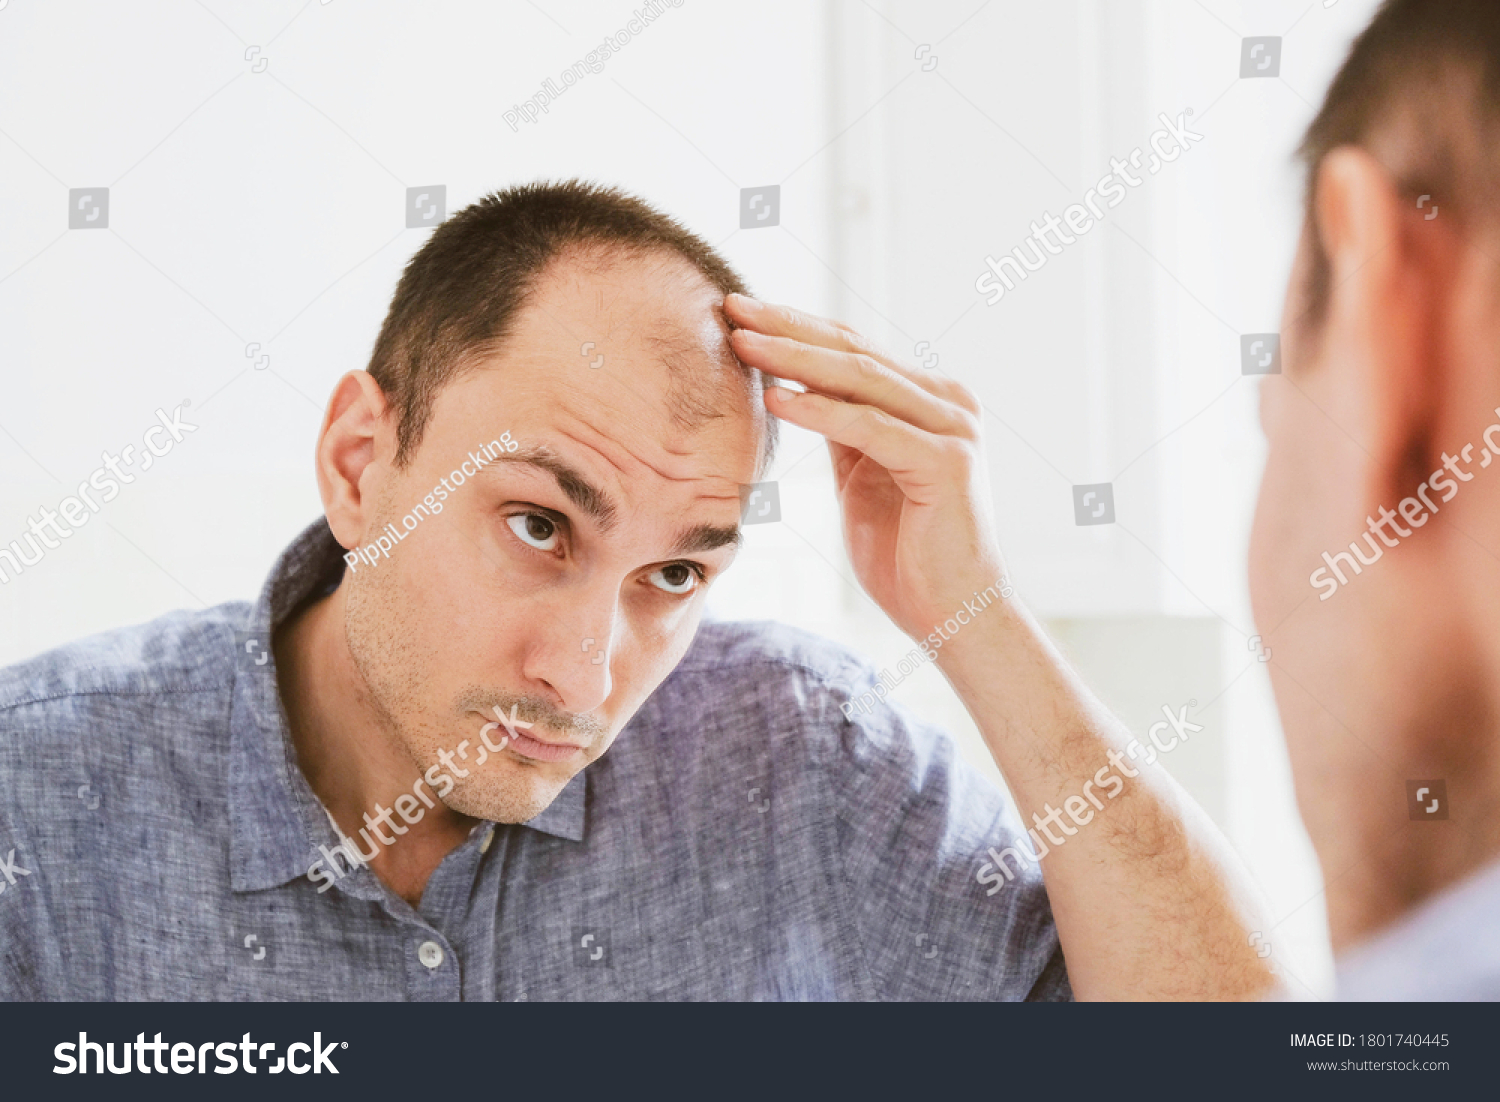 Male pattern hair loss problem concept. Young caucasian man looking at mirror worried about balding. Baldness, alopecia in males. #1801740445